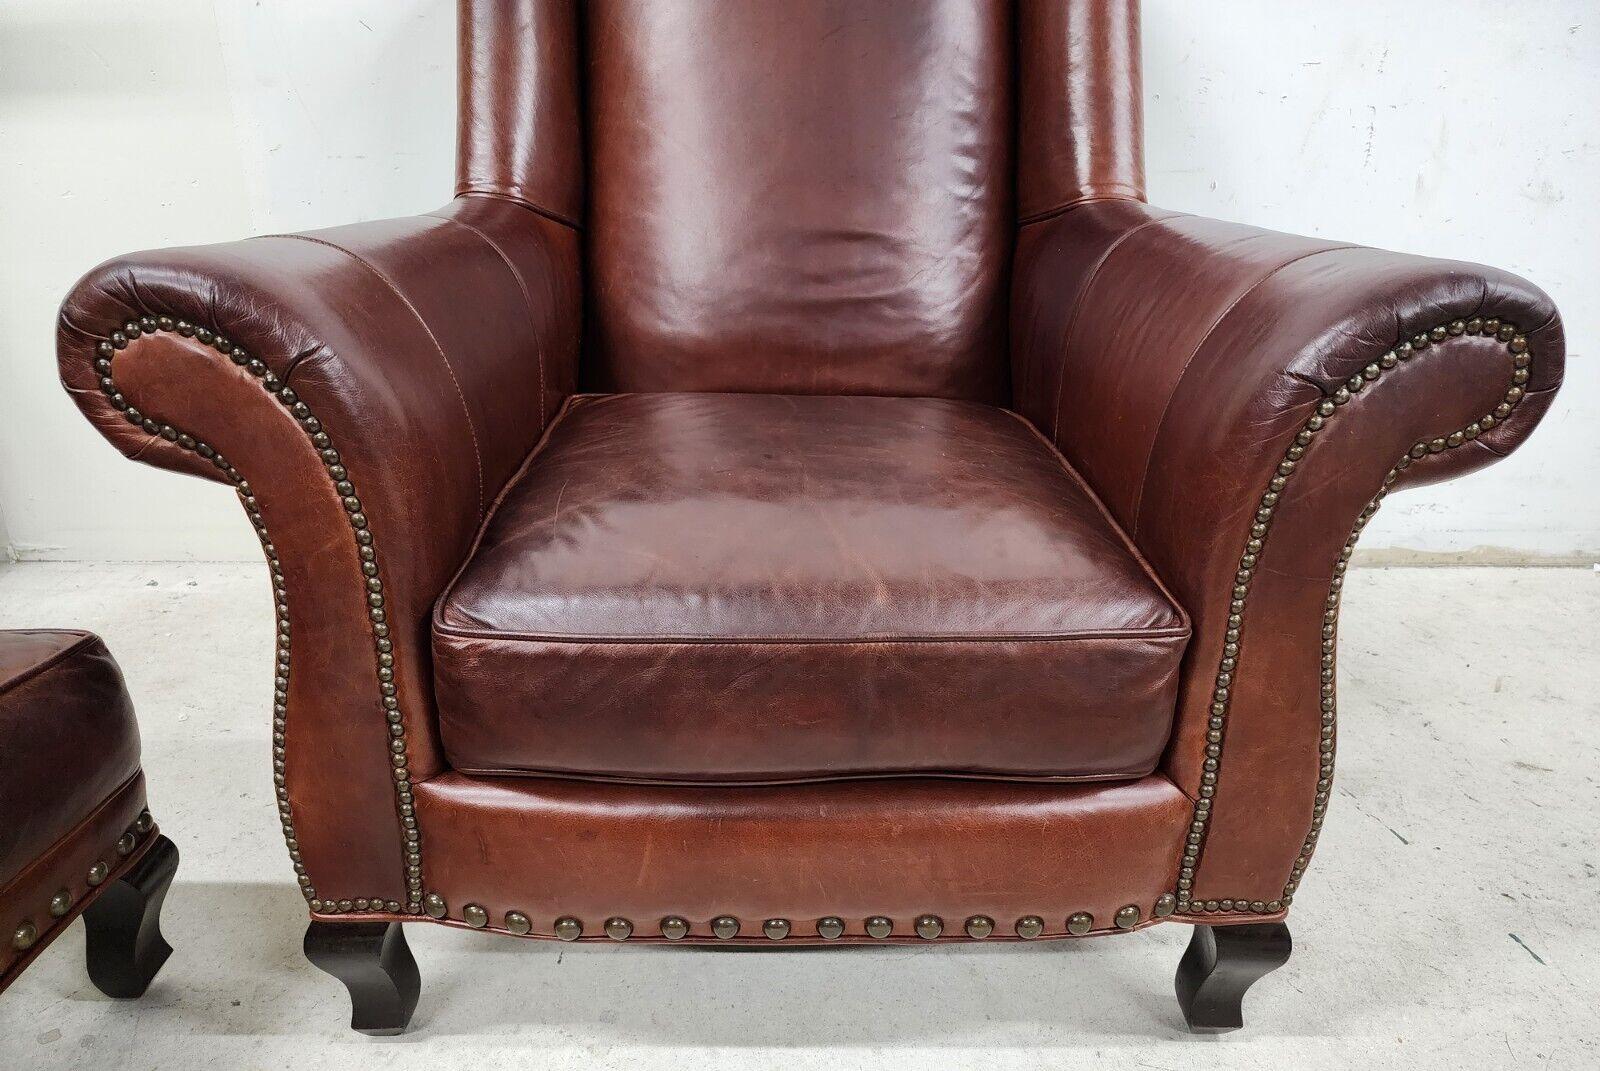 offering one of our recent palm beach estate fine furniture acquisitions of an
oversized top grain leather wingback library reading armchair & ottoman by ARHAUS
Beautiful set! Very comfortable.

We have many other similar chair and ottoman sets